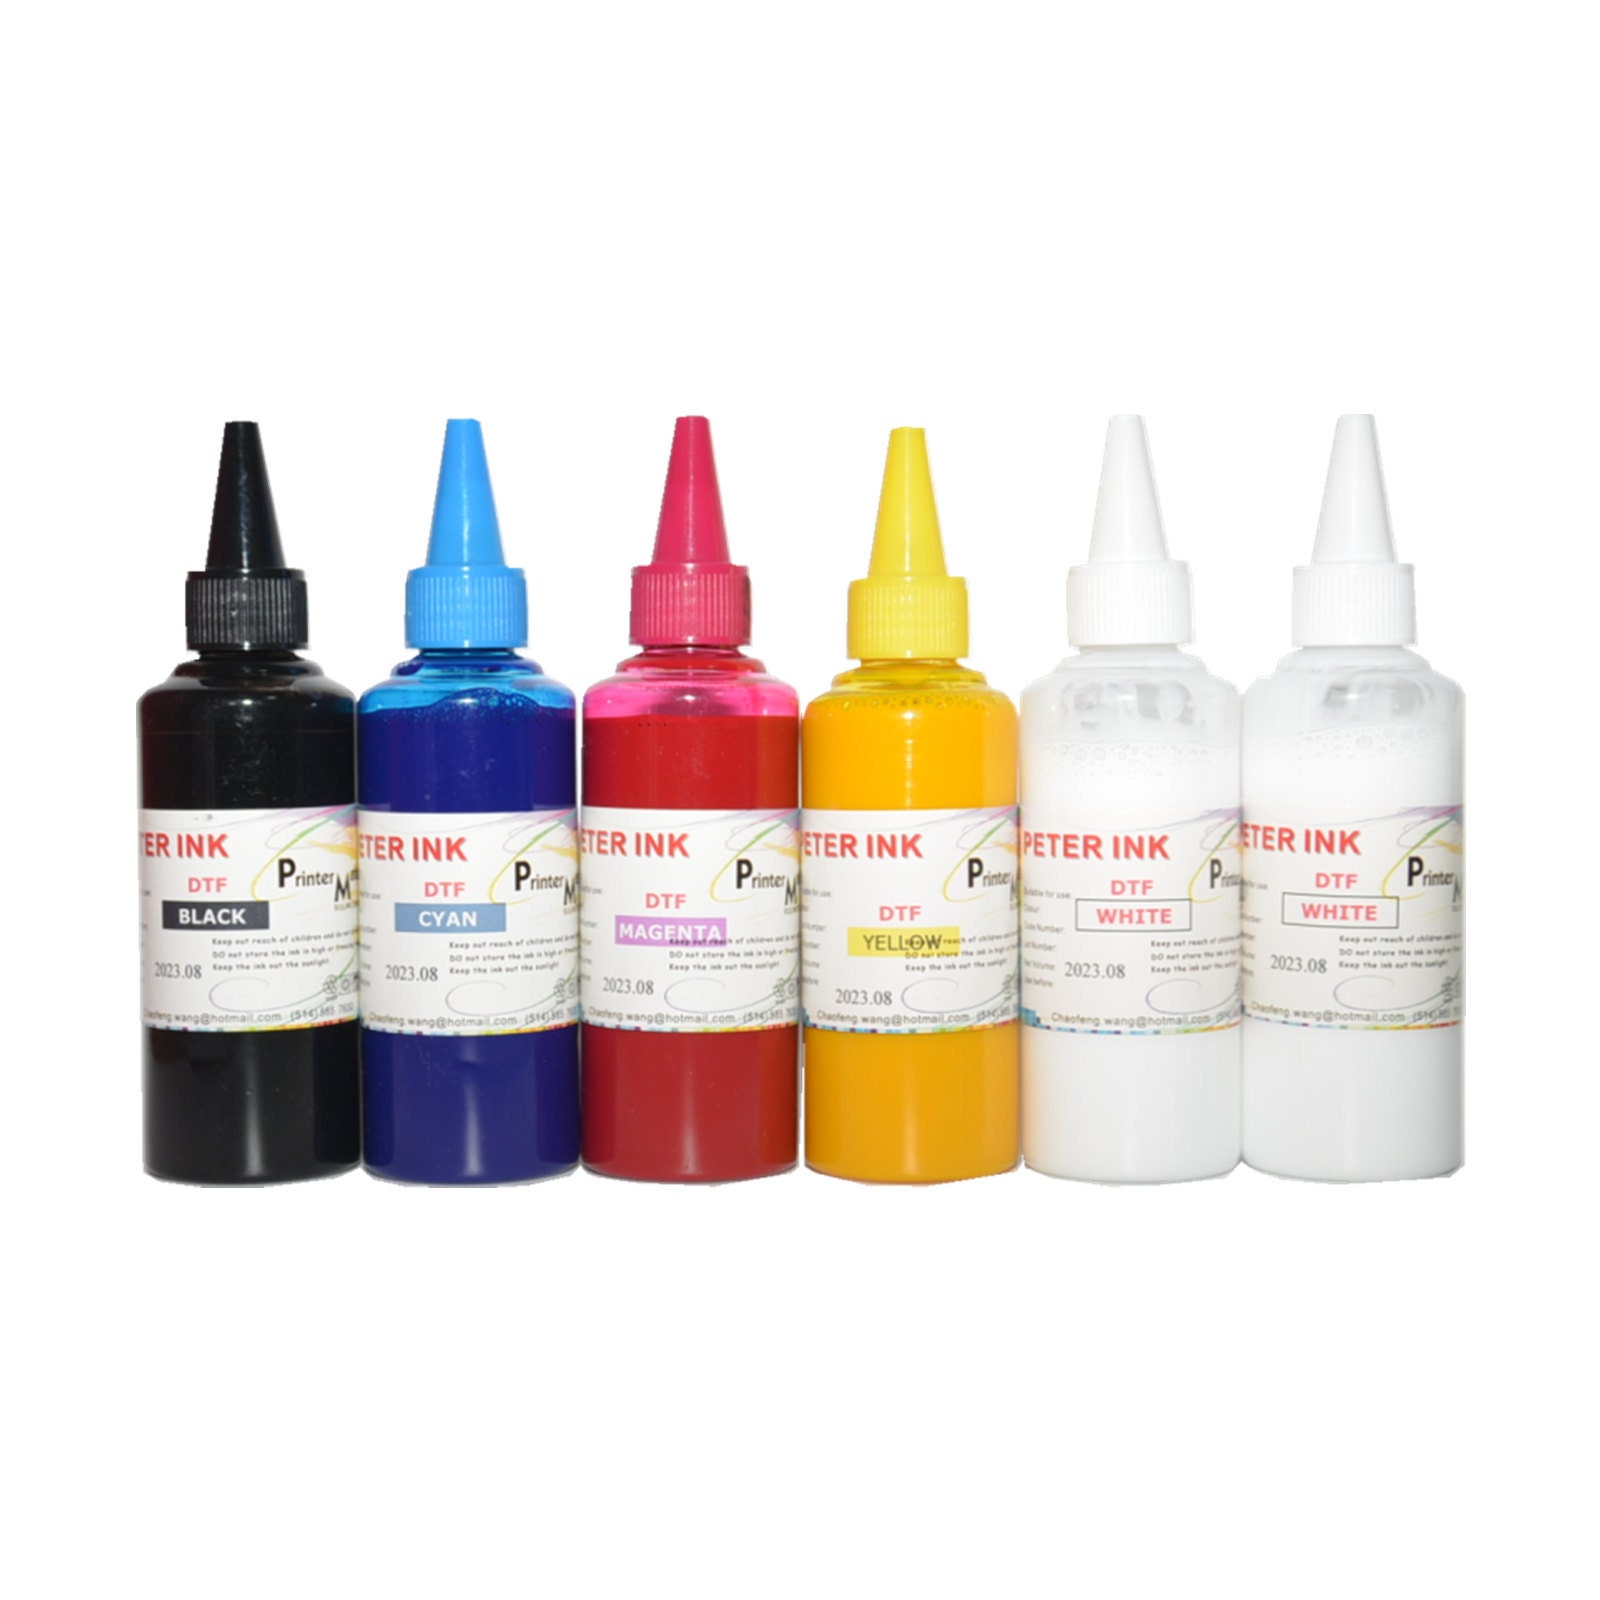 4x100ml Sublimation Ink for Epson Wf-2950 Wf-2930 Xp-4200 Xp-4205 Printer  T232 232 Refillable Ink Cartridges CISS for Heat Press 